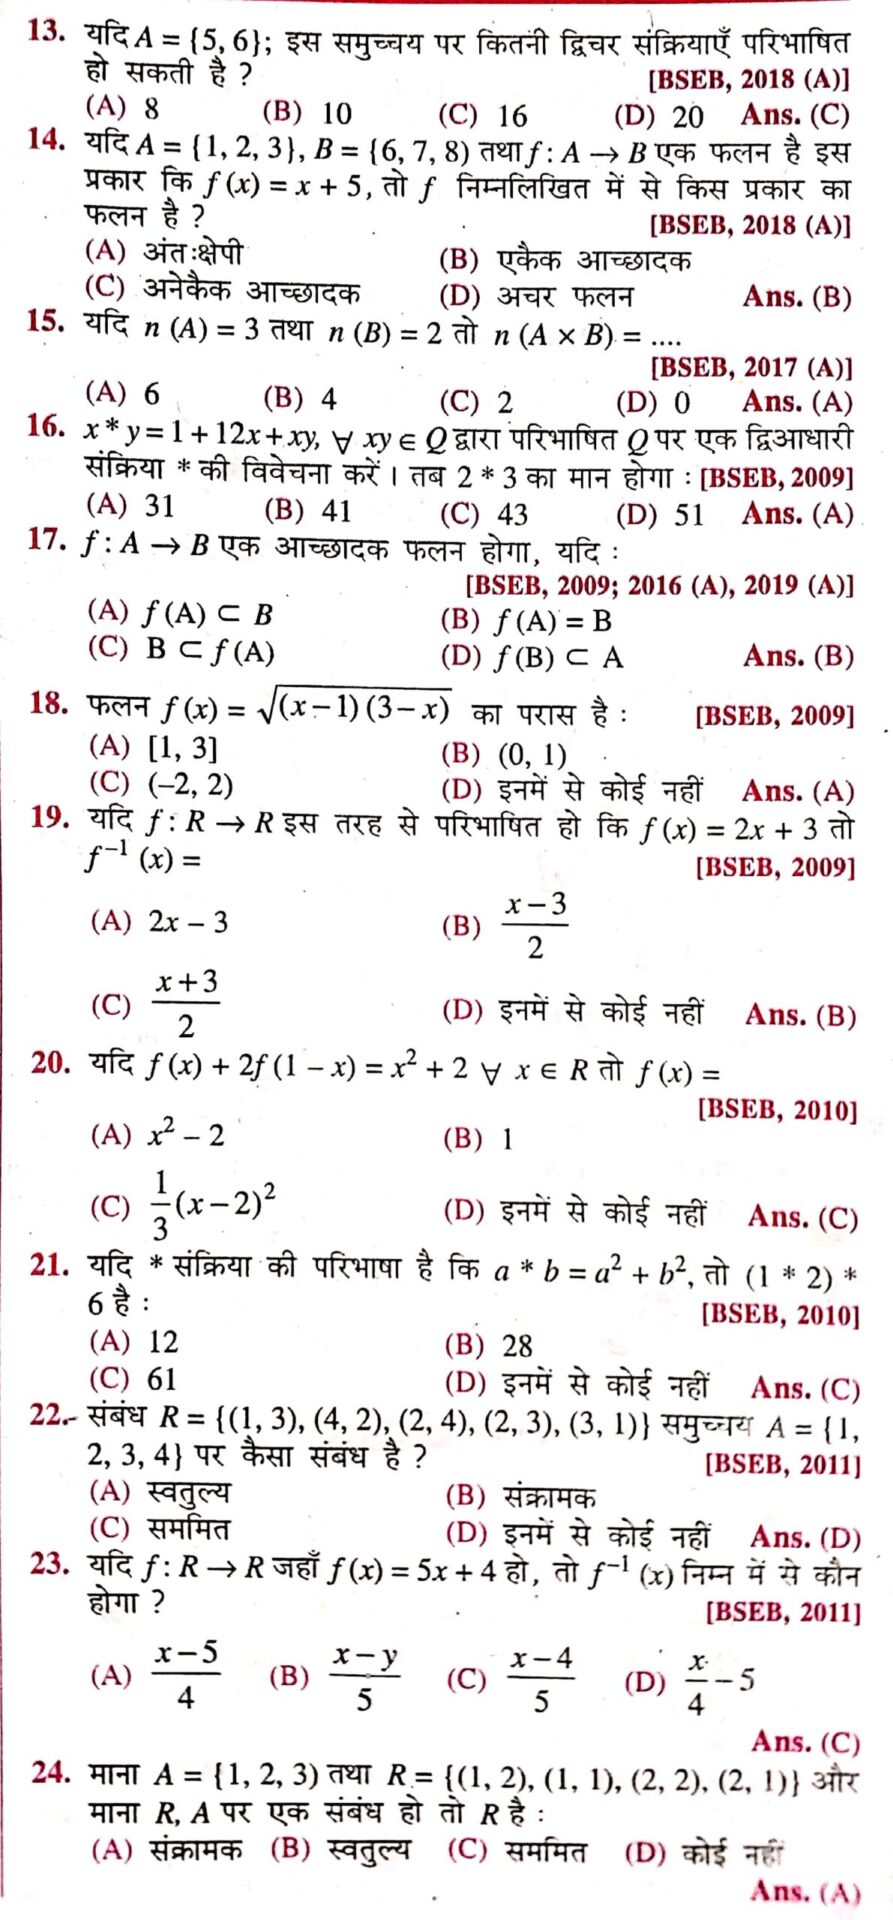 गणित कक्षा-12 संबंध और फलन (Relation and Function) Question Answer 2023 | Class 12th Math Sambandh Aur Phalan VVI Objective Question Paper Pdf Download For Inter Exam 2023